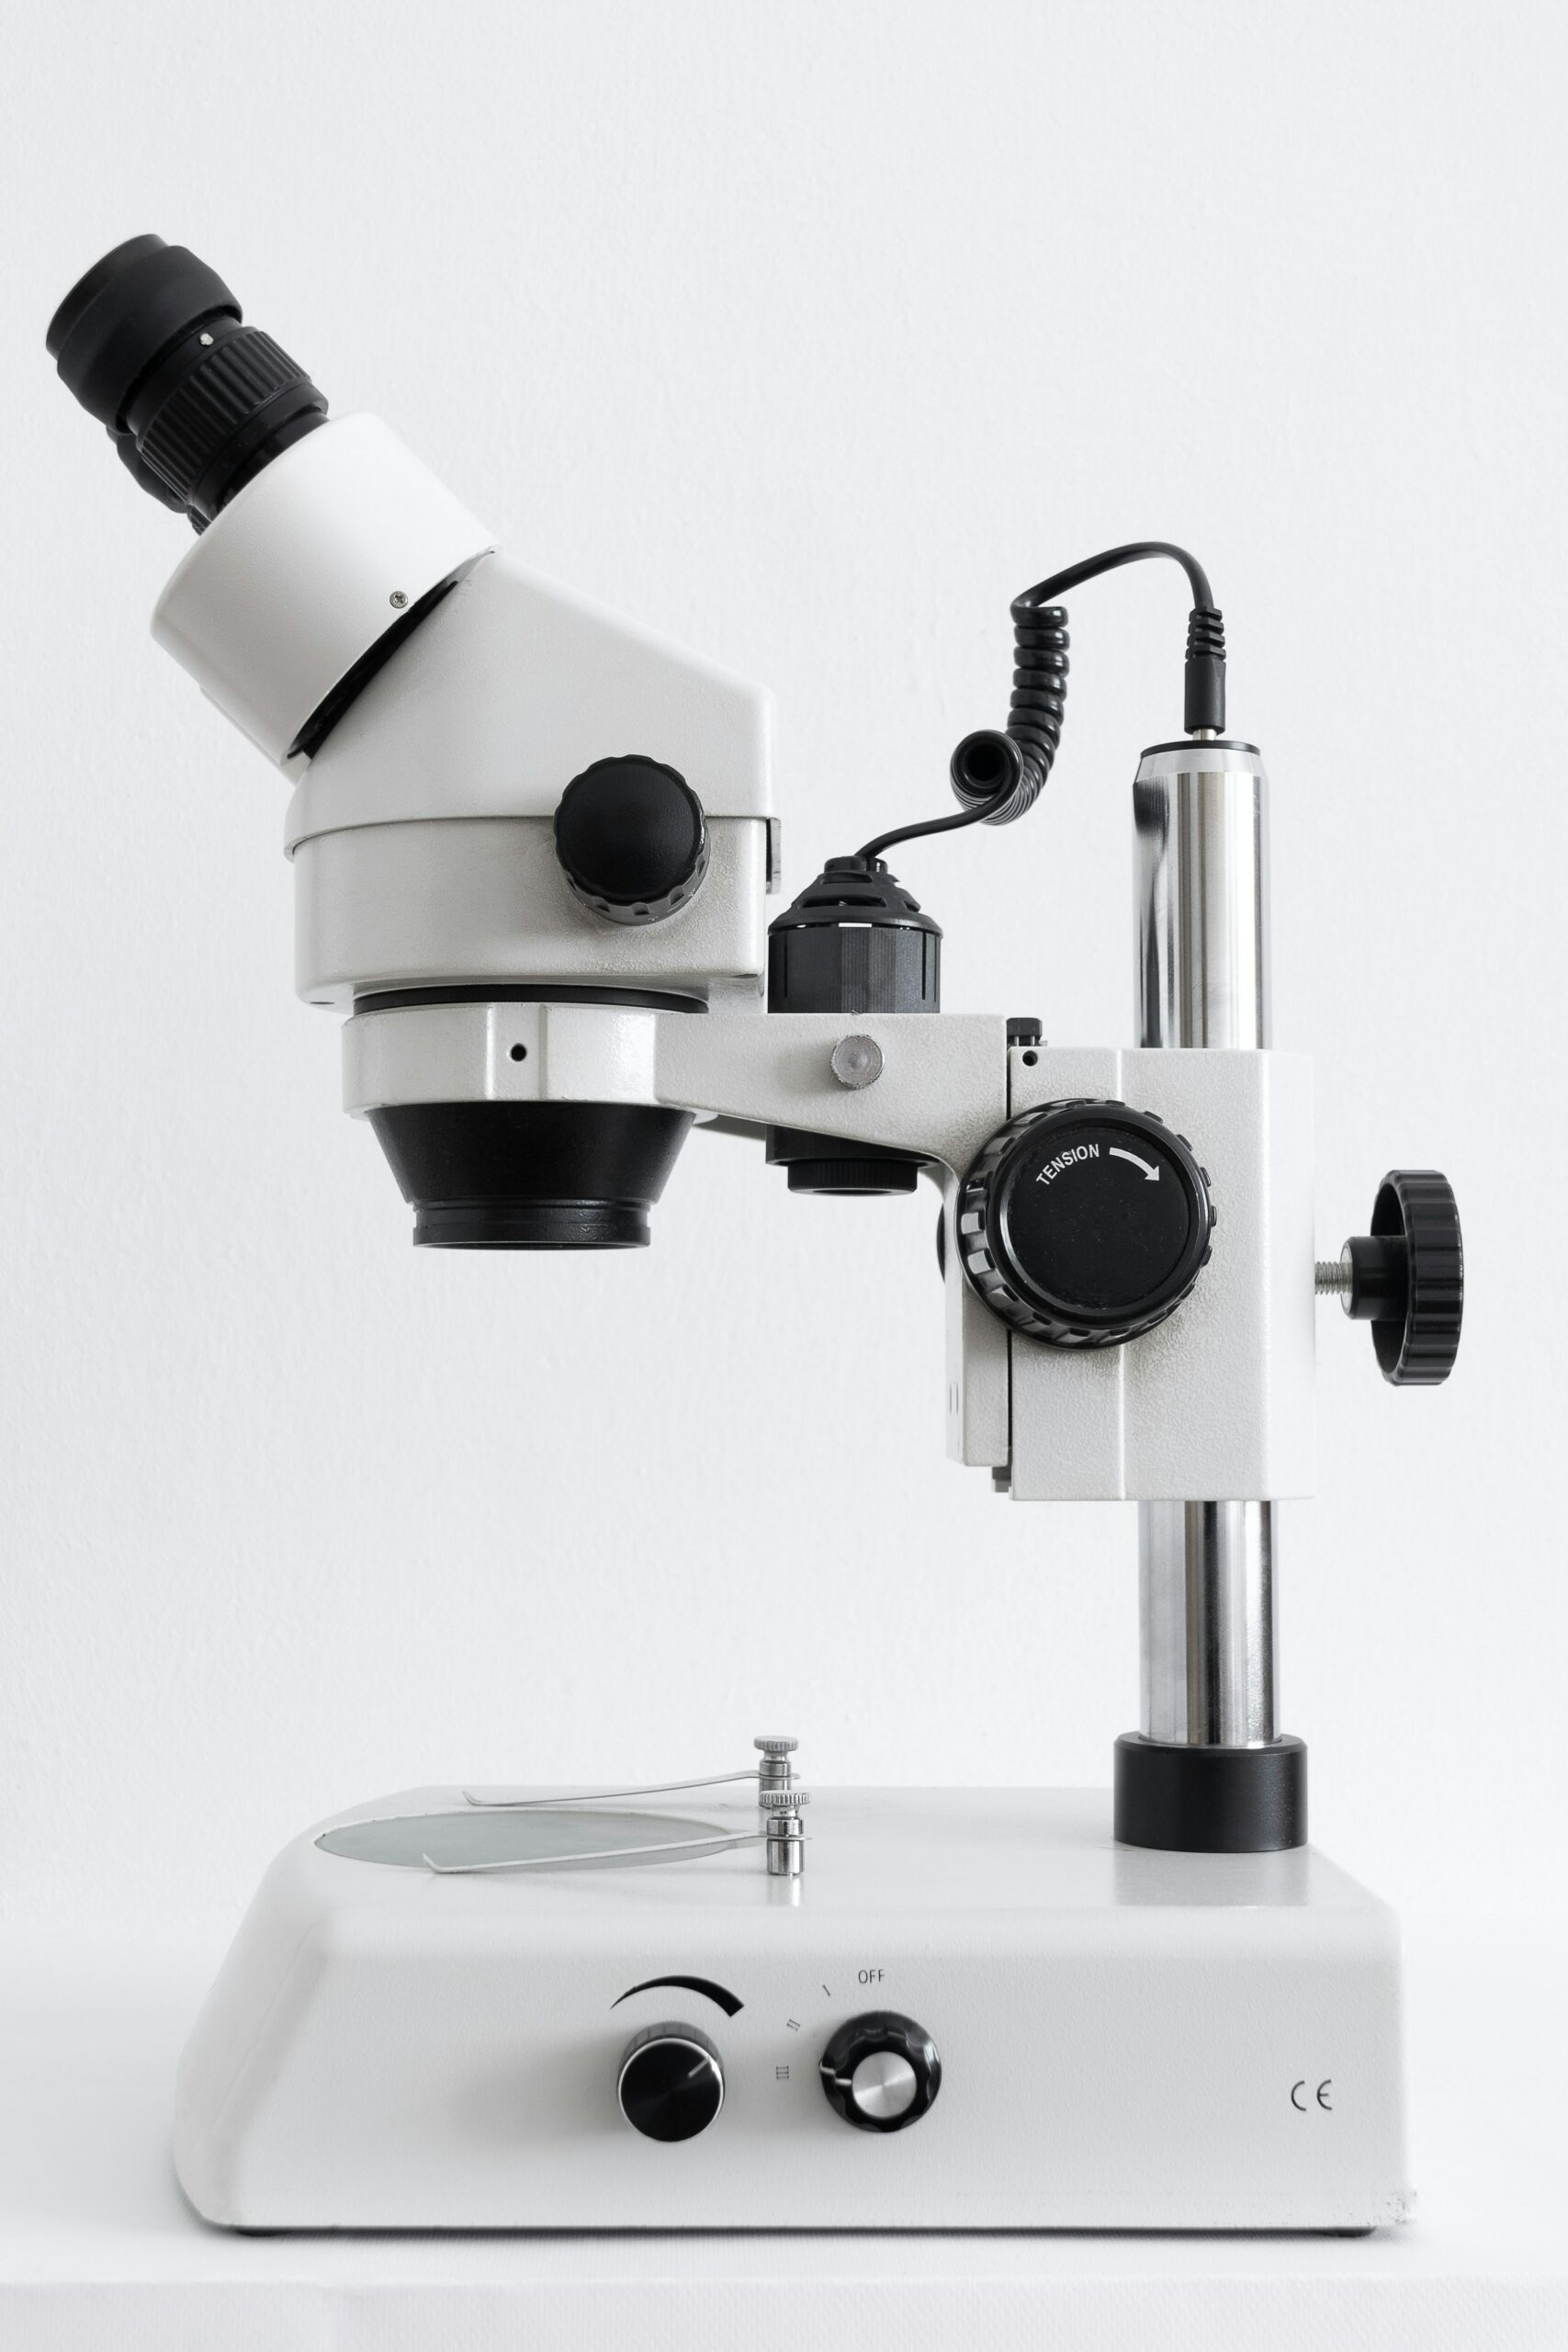 Image of a white microscope with black accessories on a white background